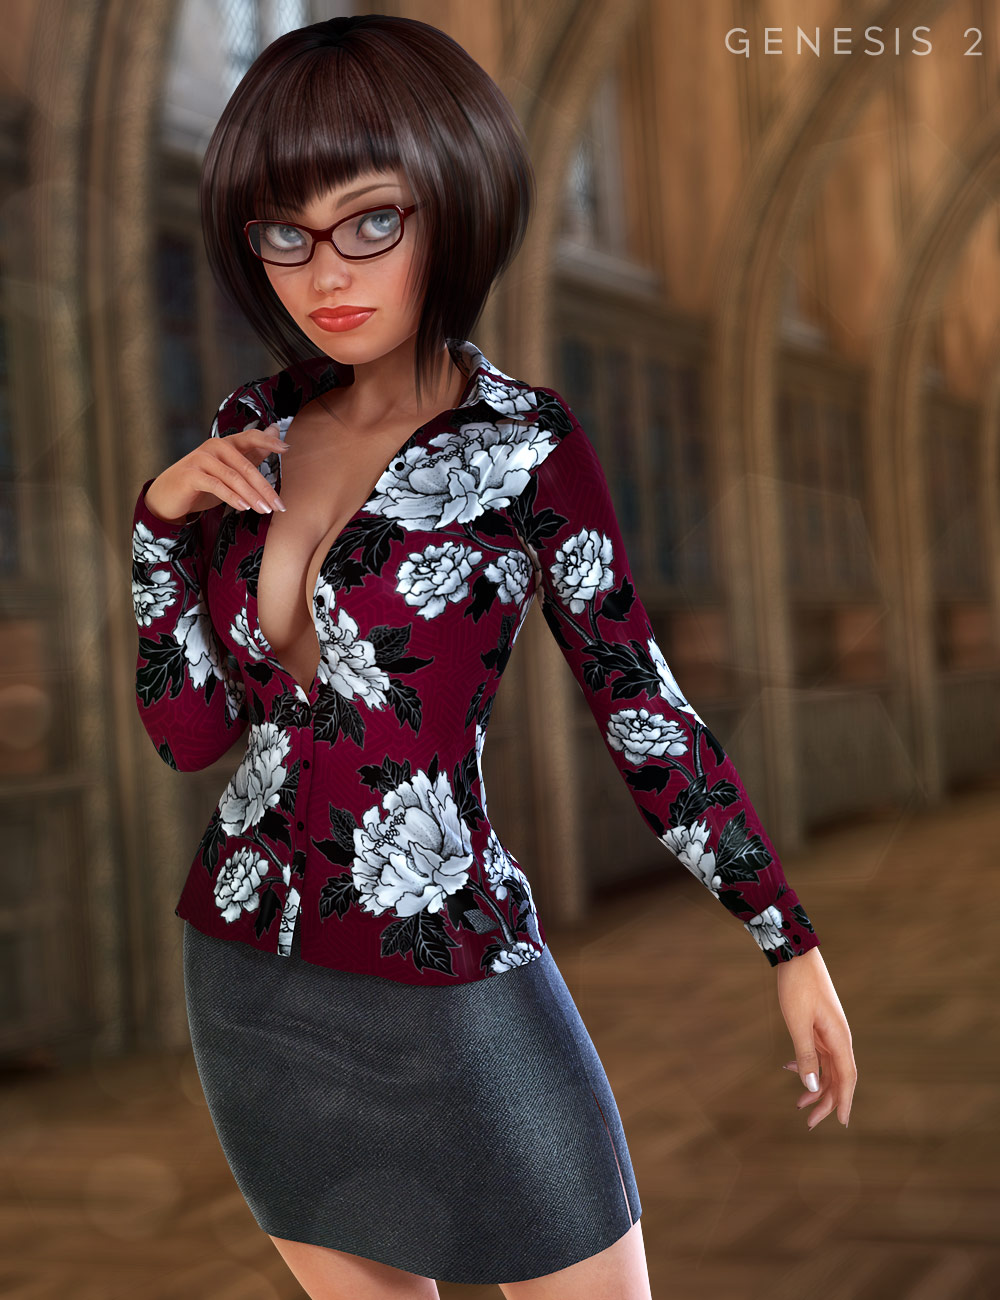 Sexy Librarian ExLibris Textures by: bucketload3d, 3D Models by Daz 3D